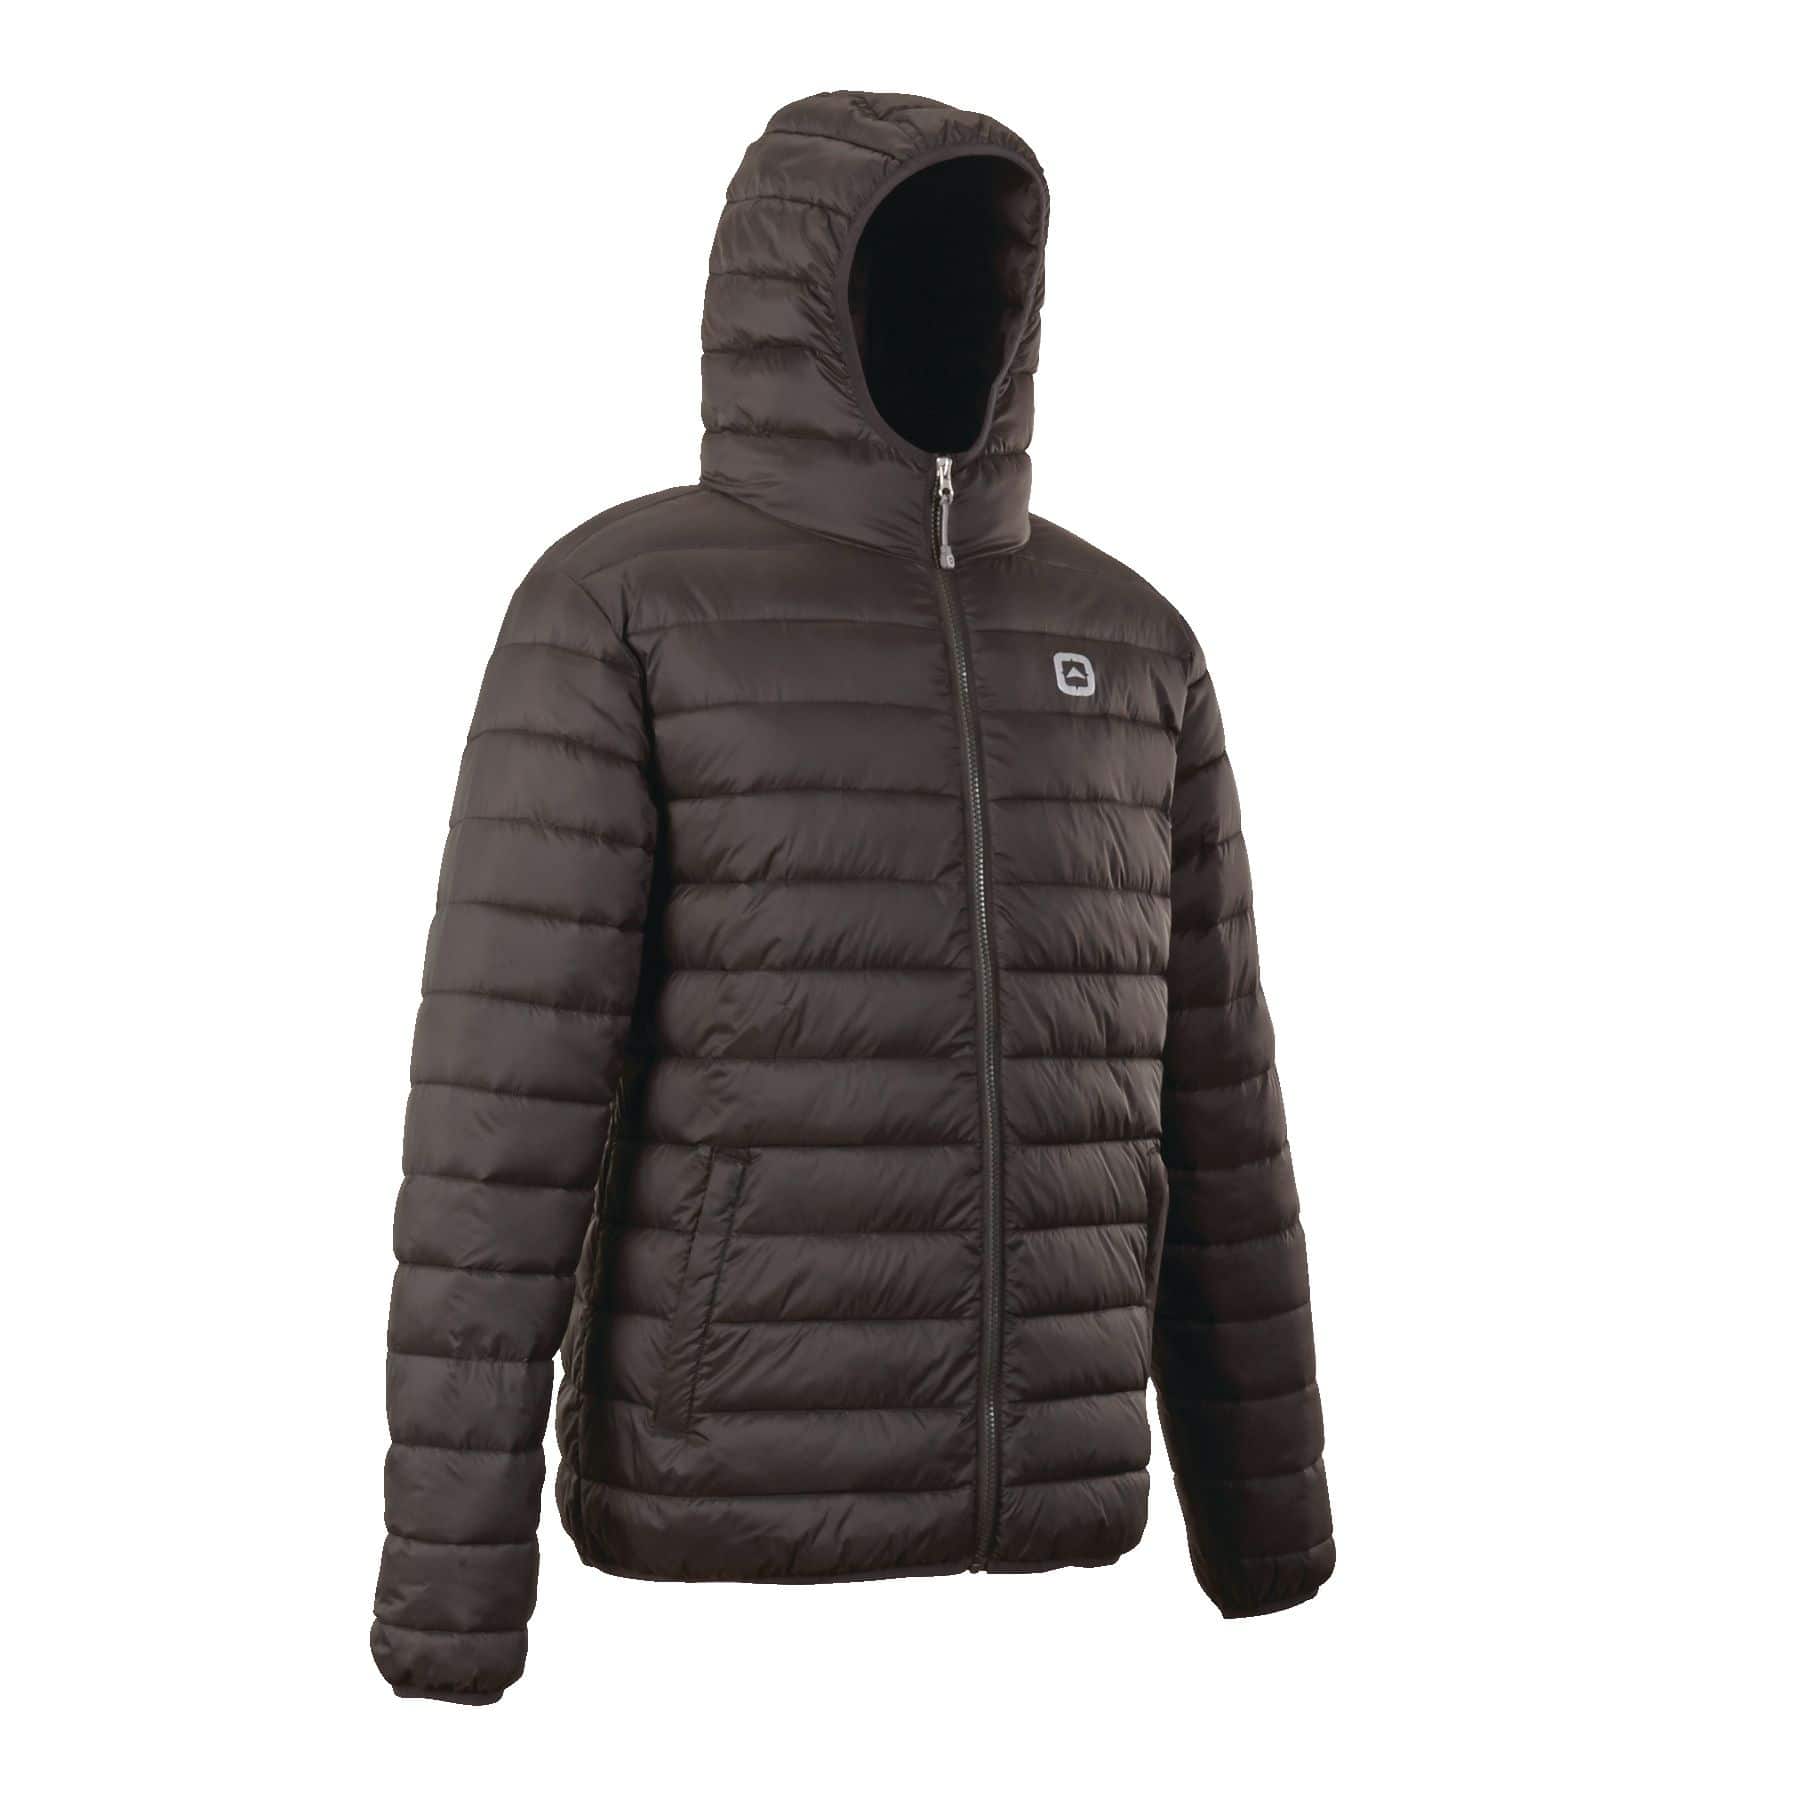 Outbound Men's Noah Packable Hooded Winter Puffer Jacket Insulated  Water-Resistant, Black